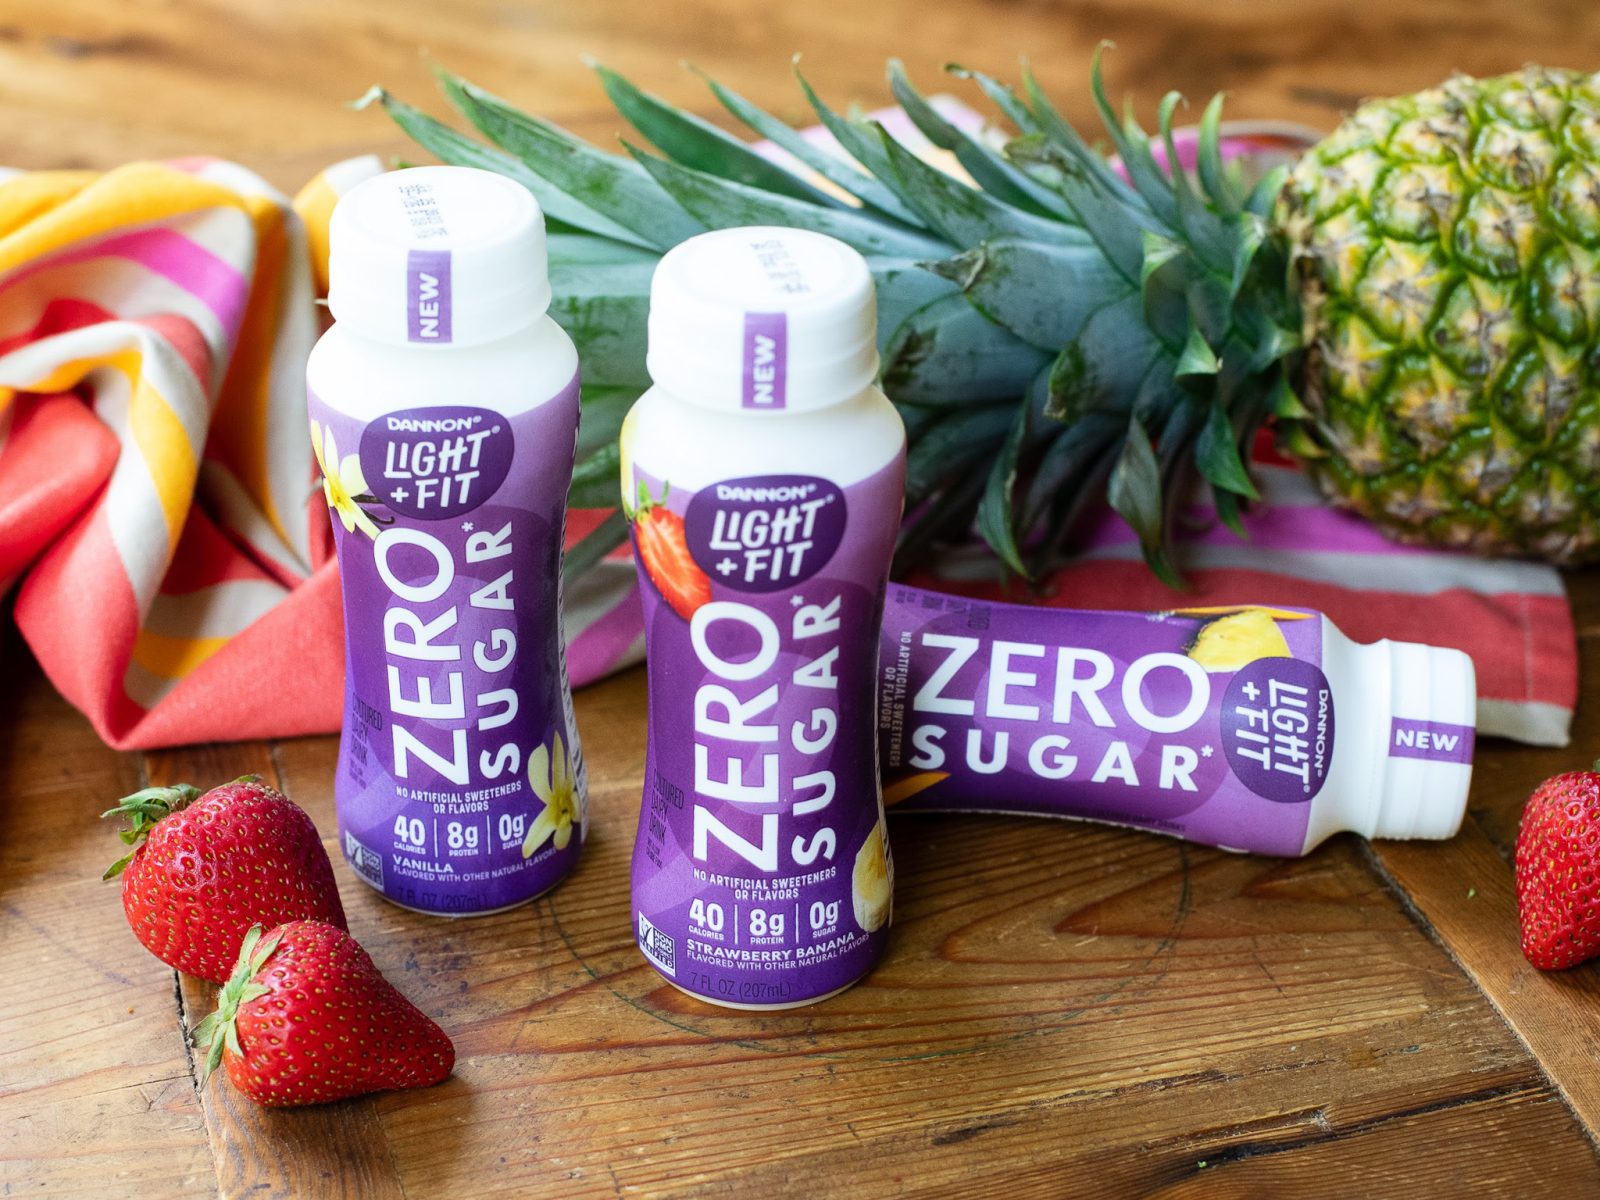 Pick Up A Dannon Light+Fit Zero Sugar Smoothie For Free At Kroger